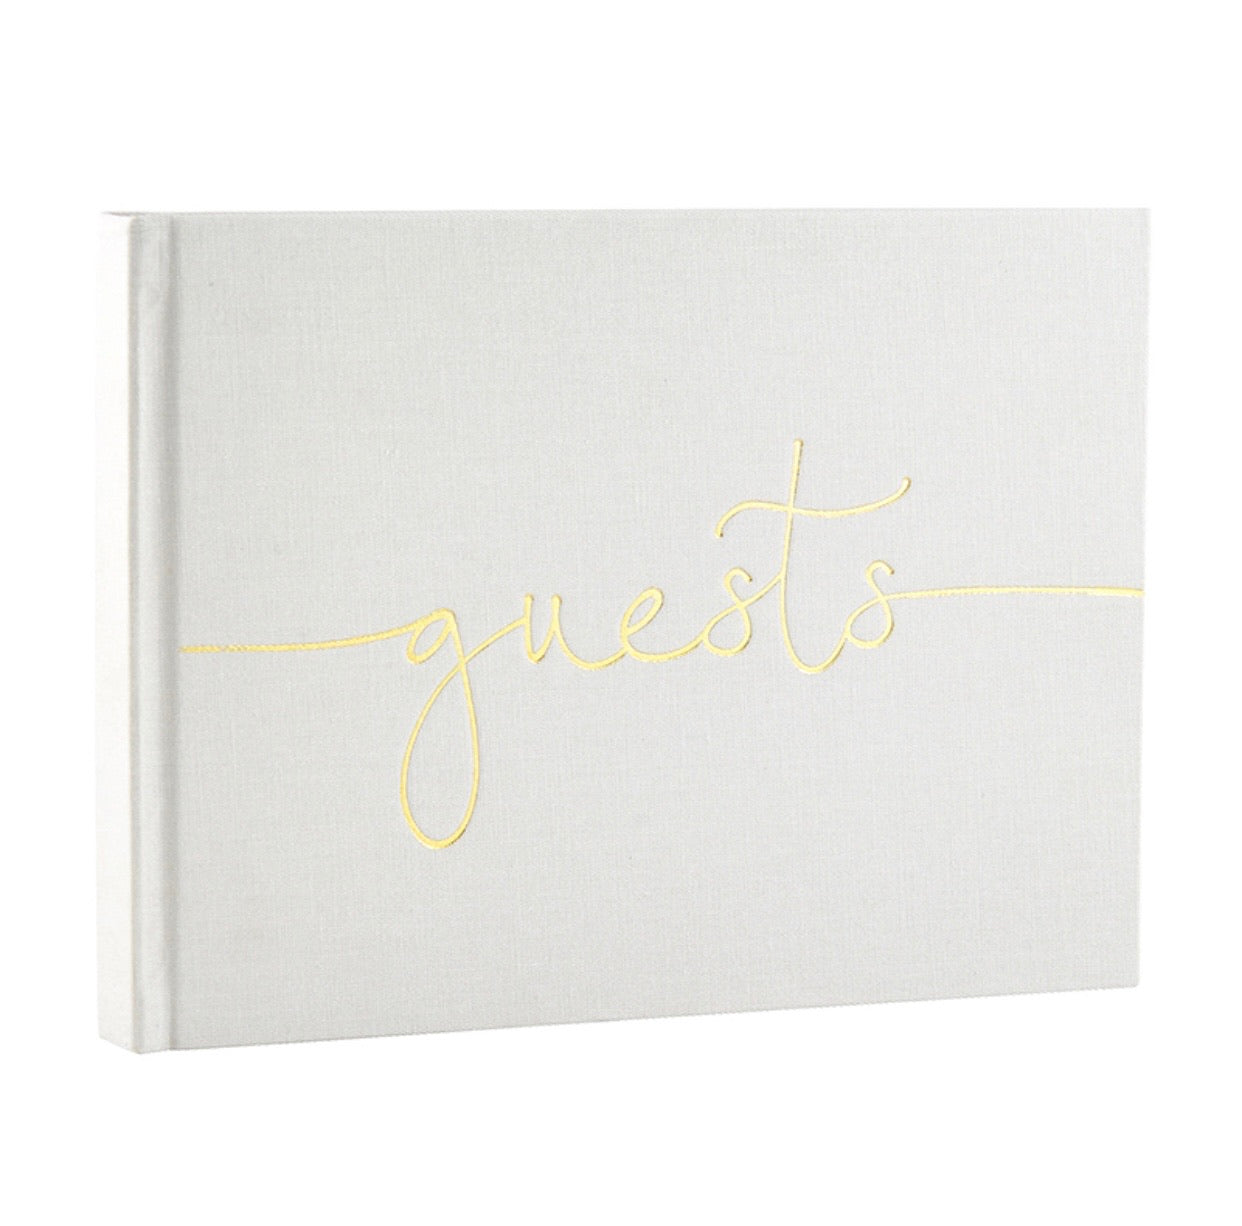 Guest Book - White & Gold